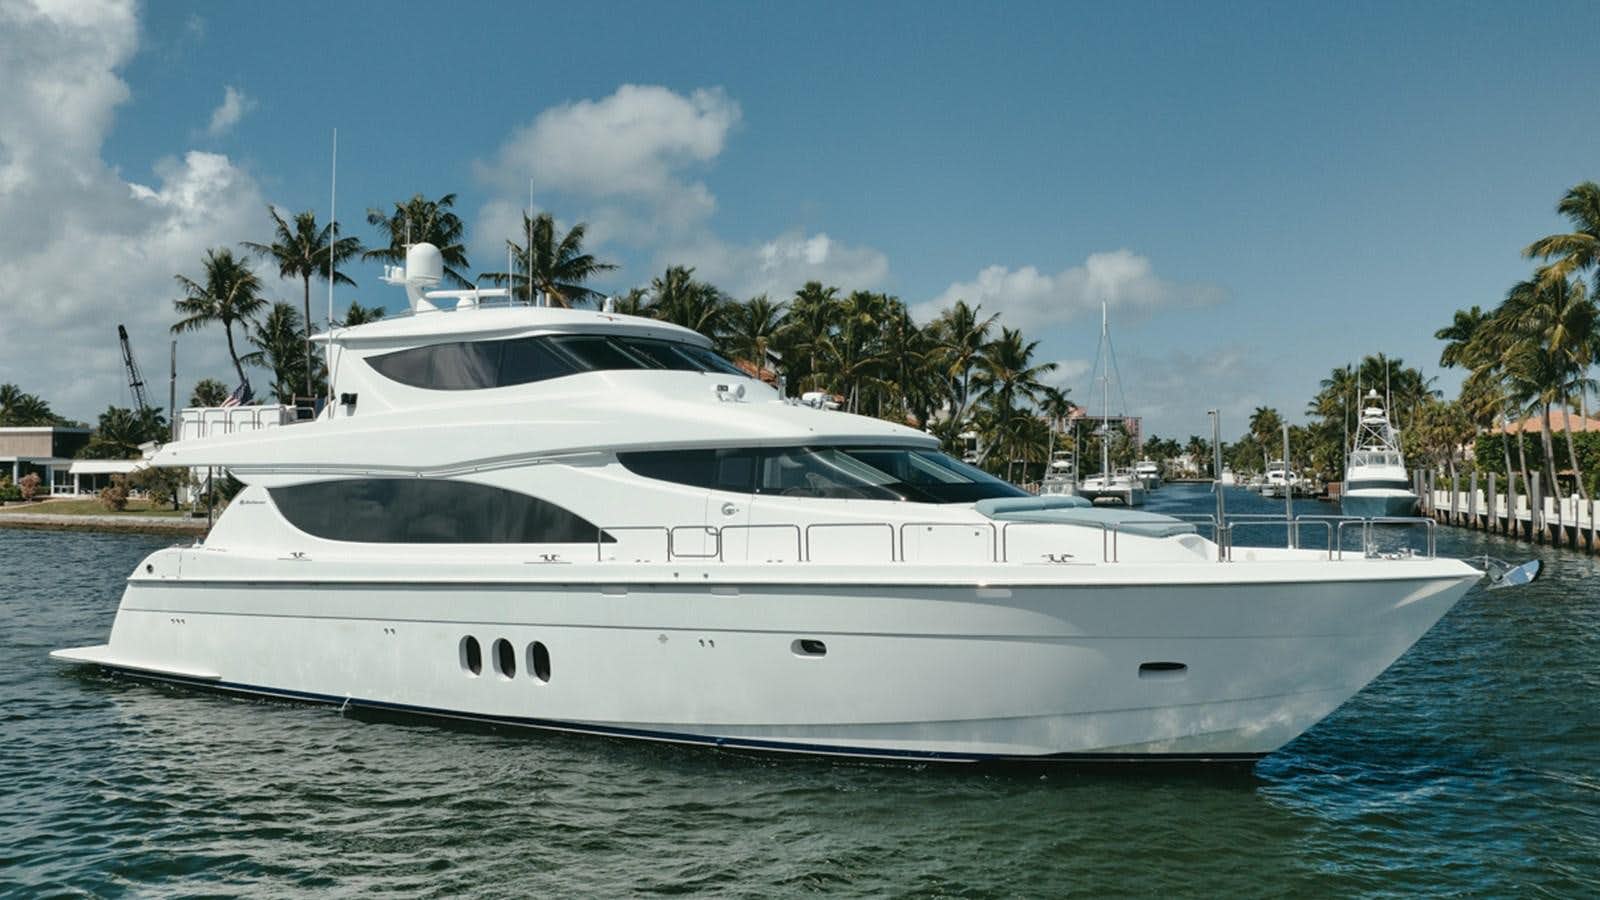 Watch Video for DONE DEAL Yacht for Sale